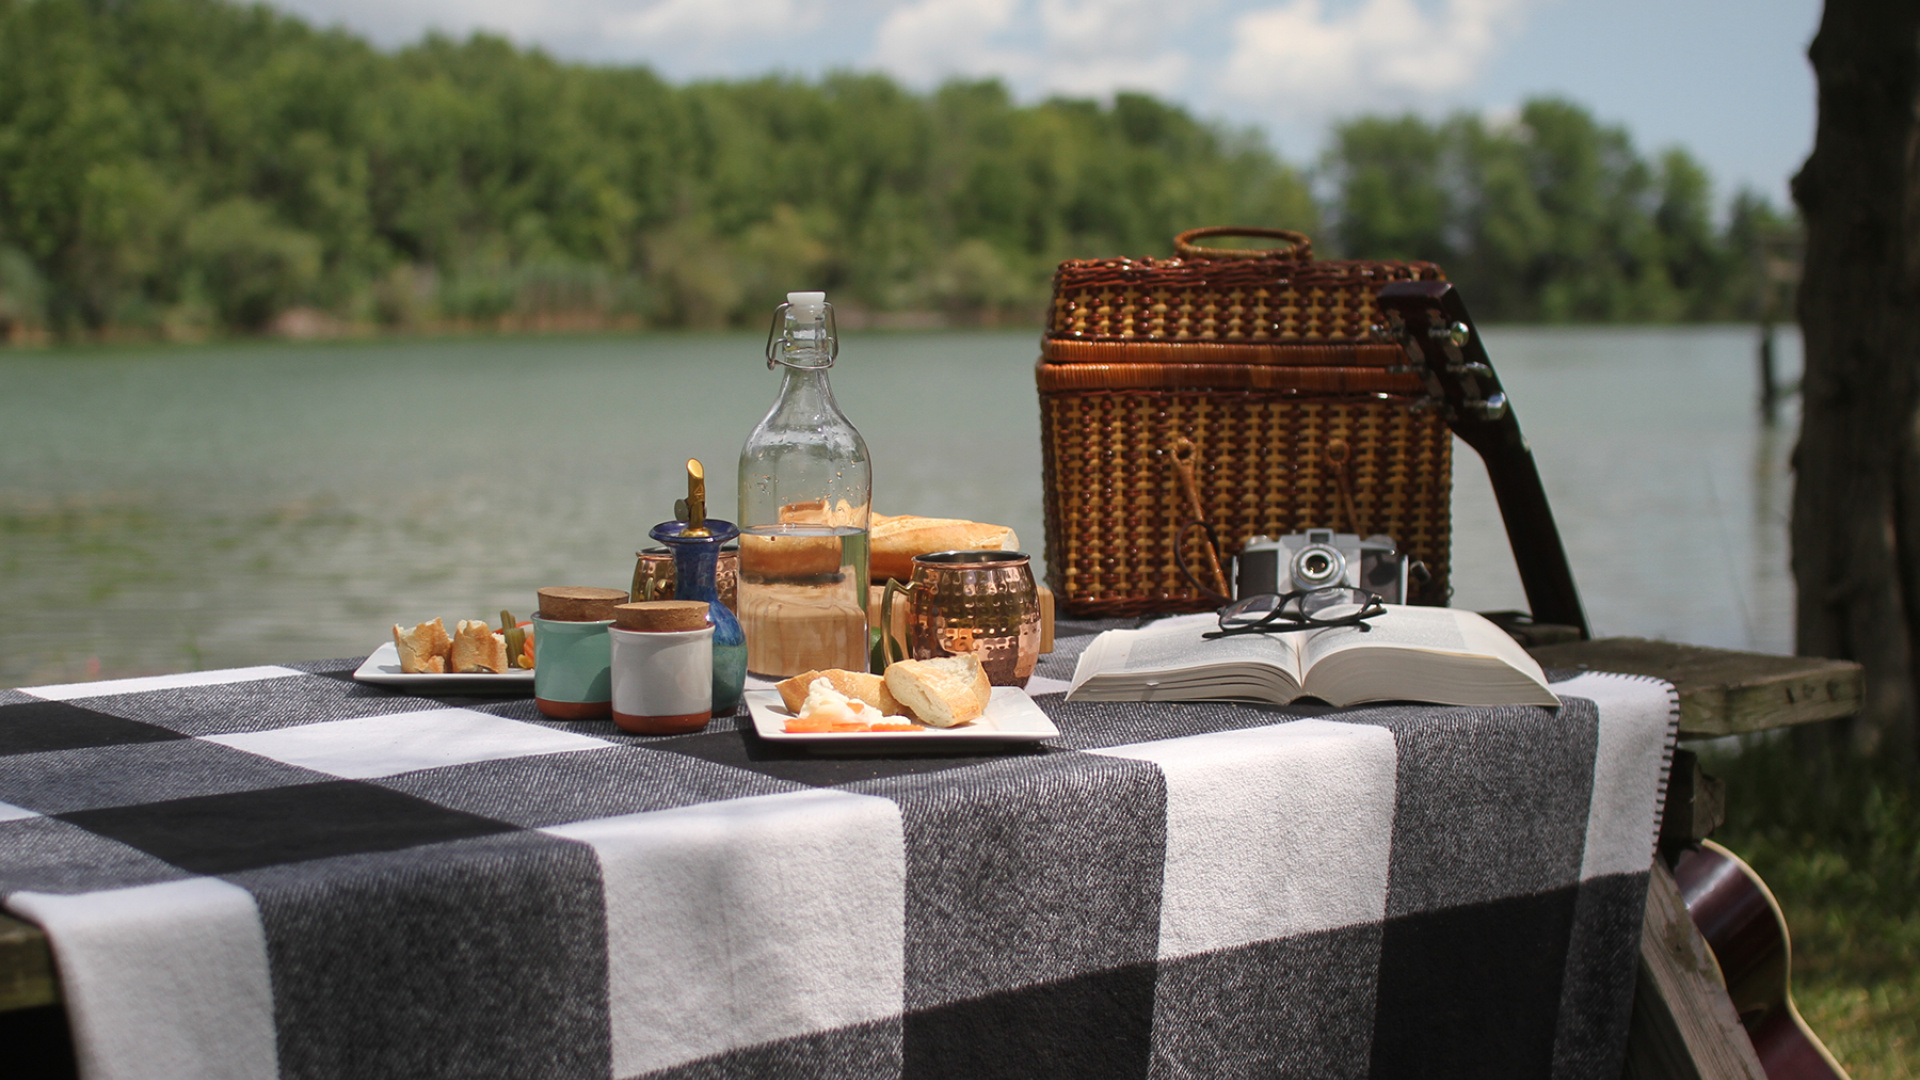 Chatham-Kent, Ontario | A picnic on the Thames River